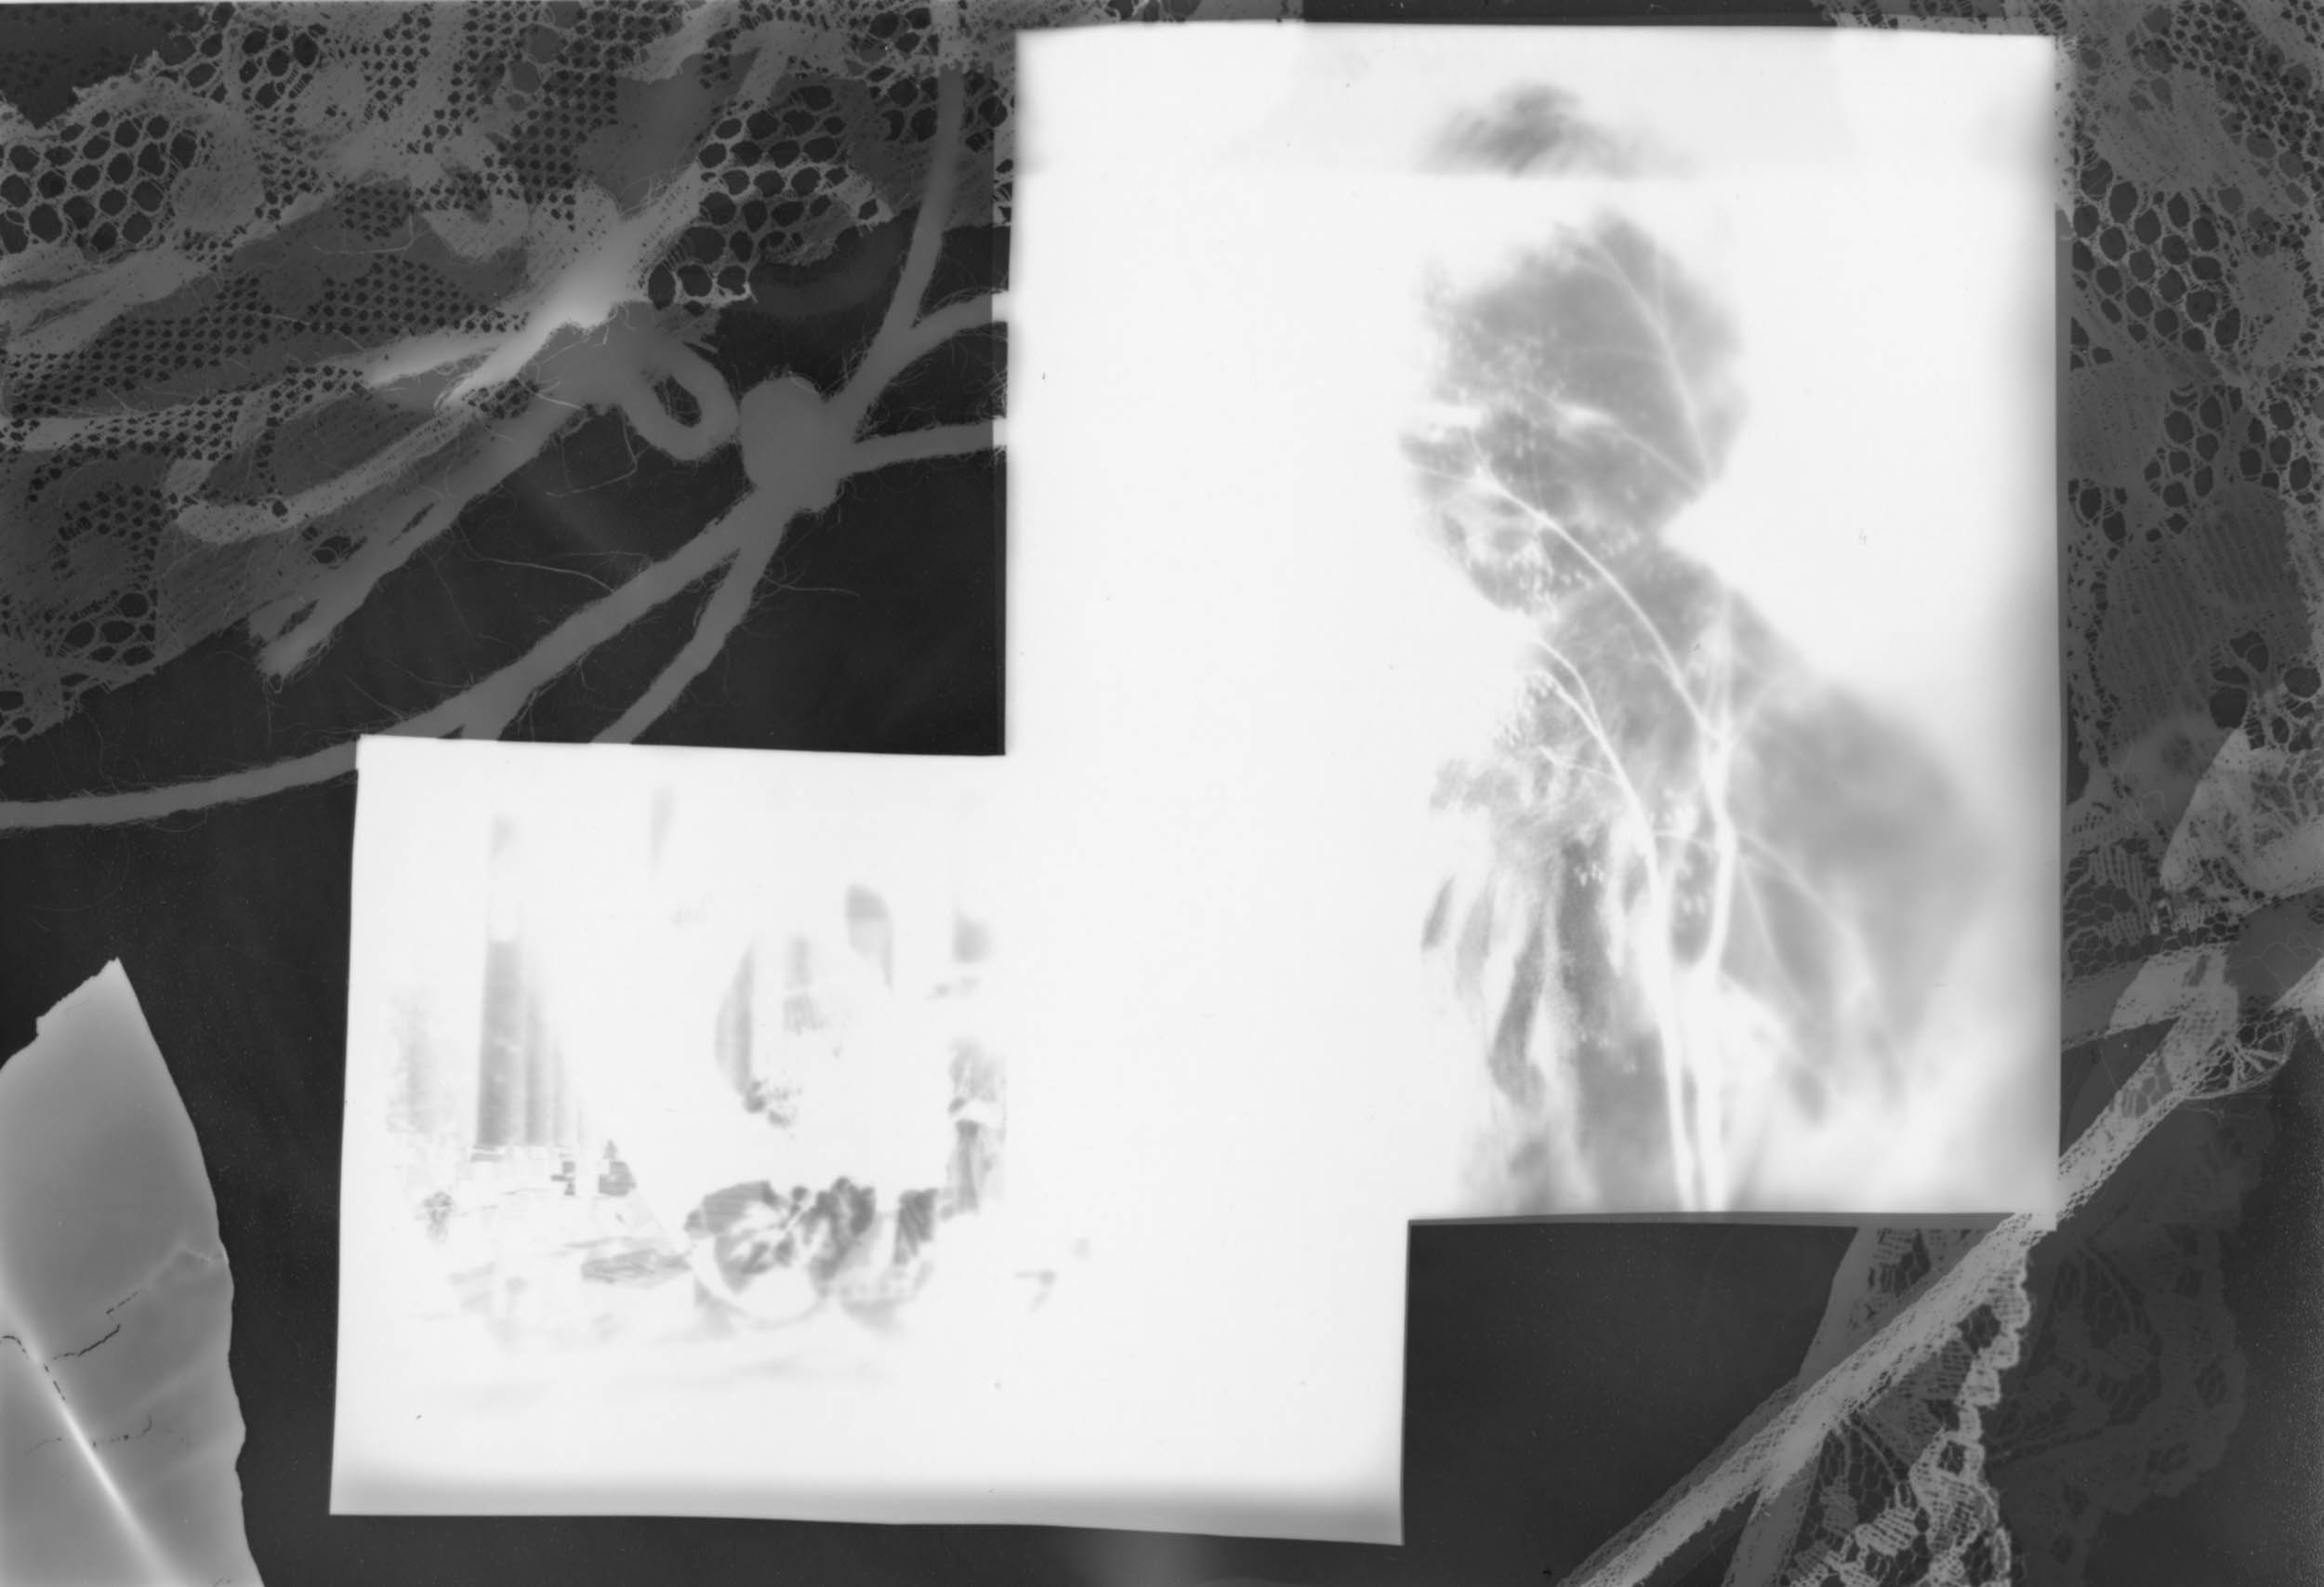 Black and white silver gelatin photogram of a transparent magazine image of a boy, with branches of trees seen through him. White silhouettes from leaves, lace, and thread surround the image.